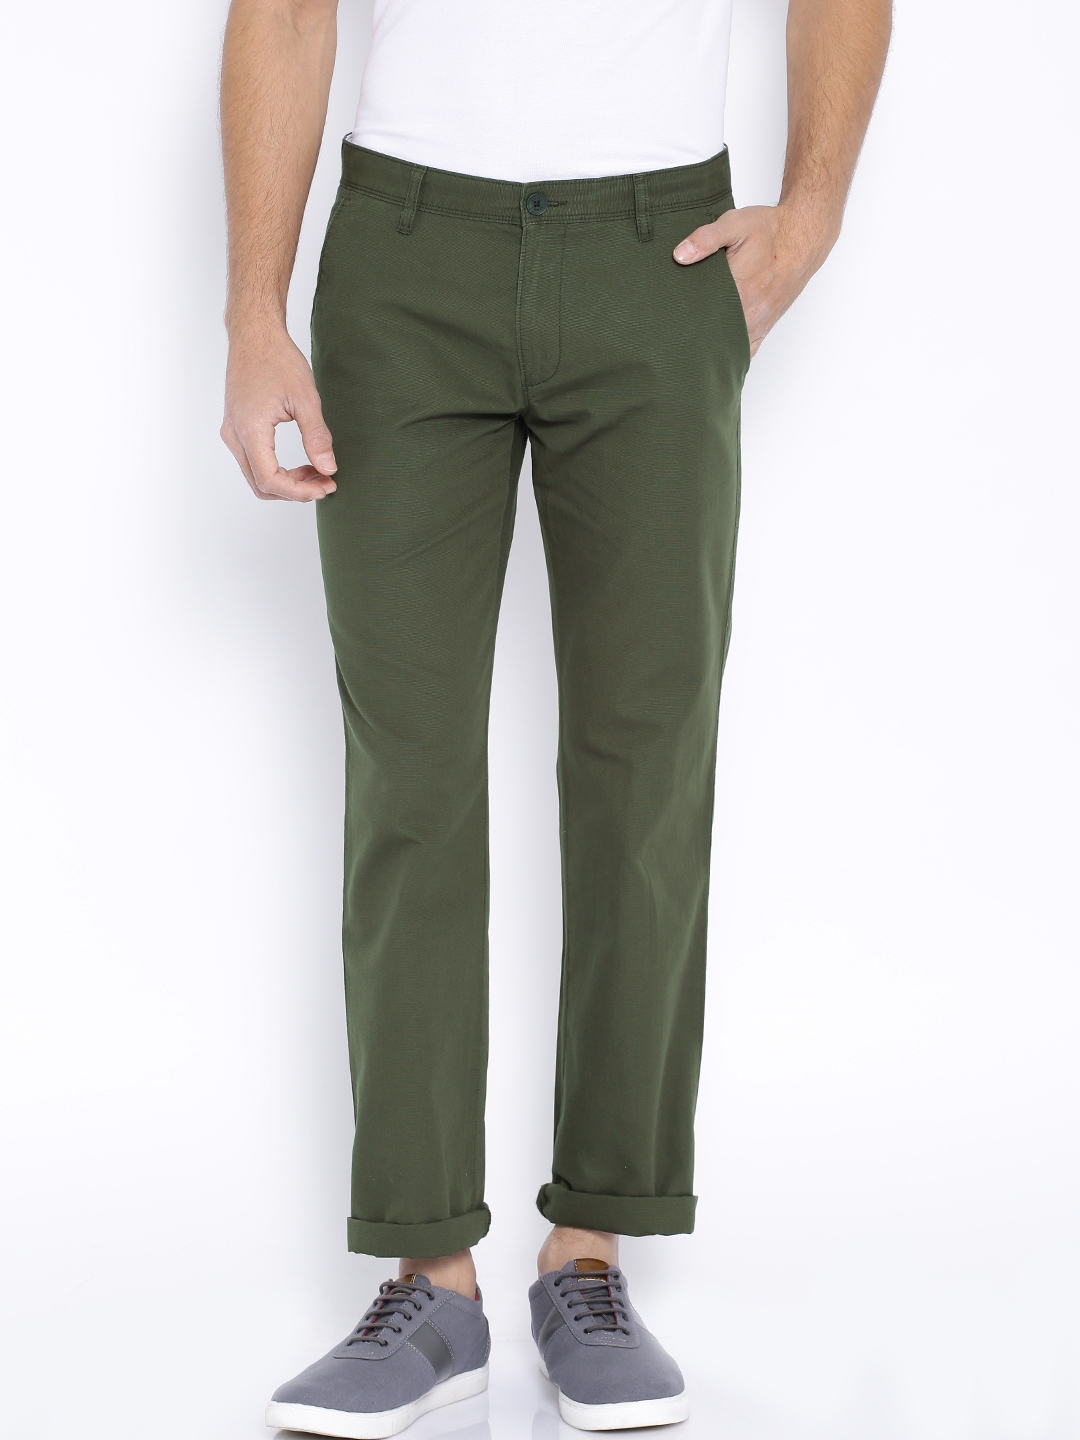 Byford By Pantaloons Grey Solid Regular Fit Chinos - Buy Byford By